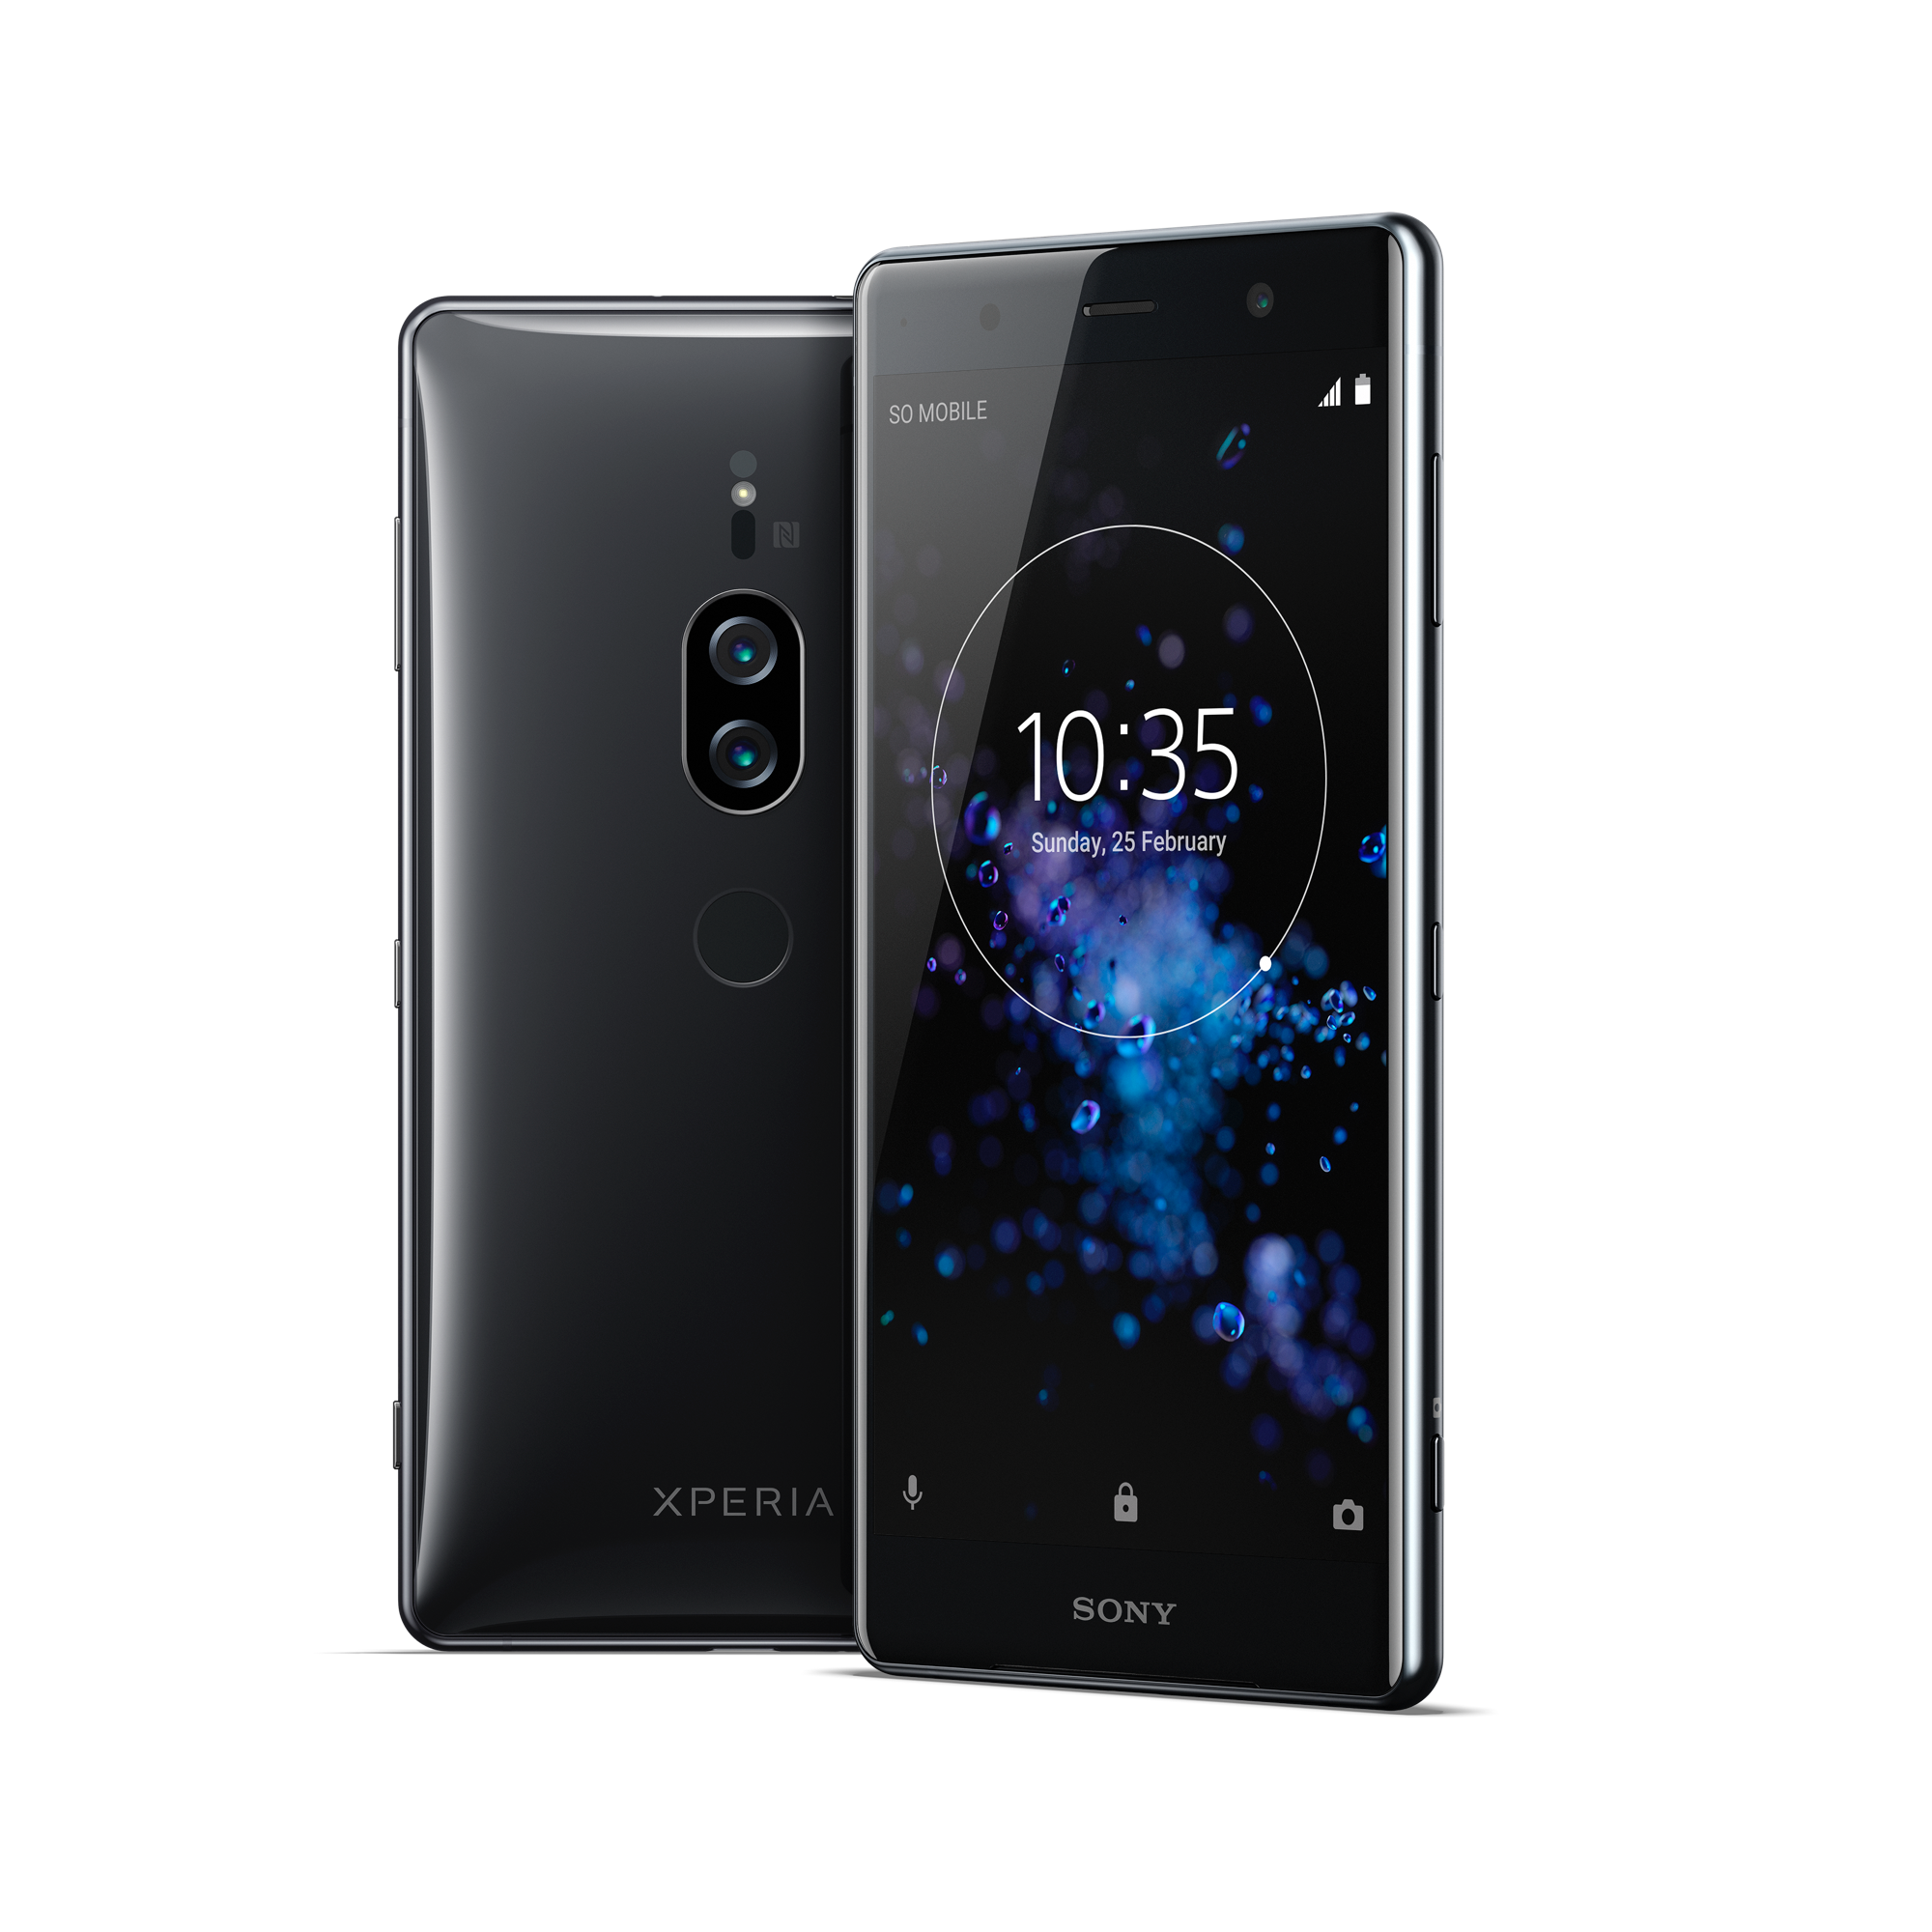 Sony Xperia XZ2 Premium updated to Android 9 Pie